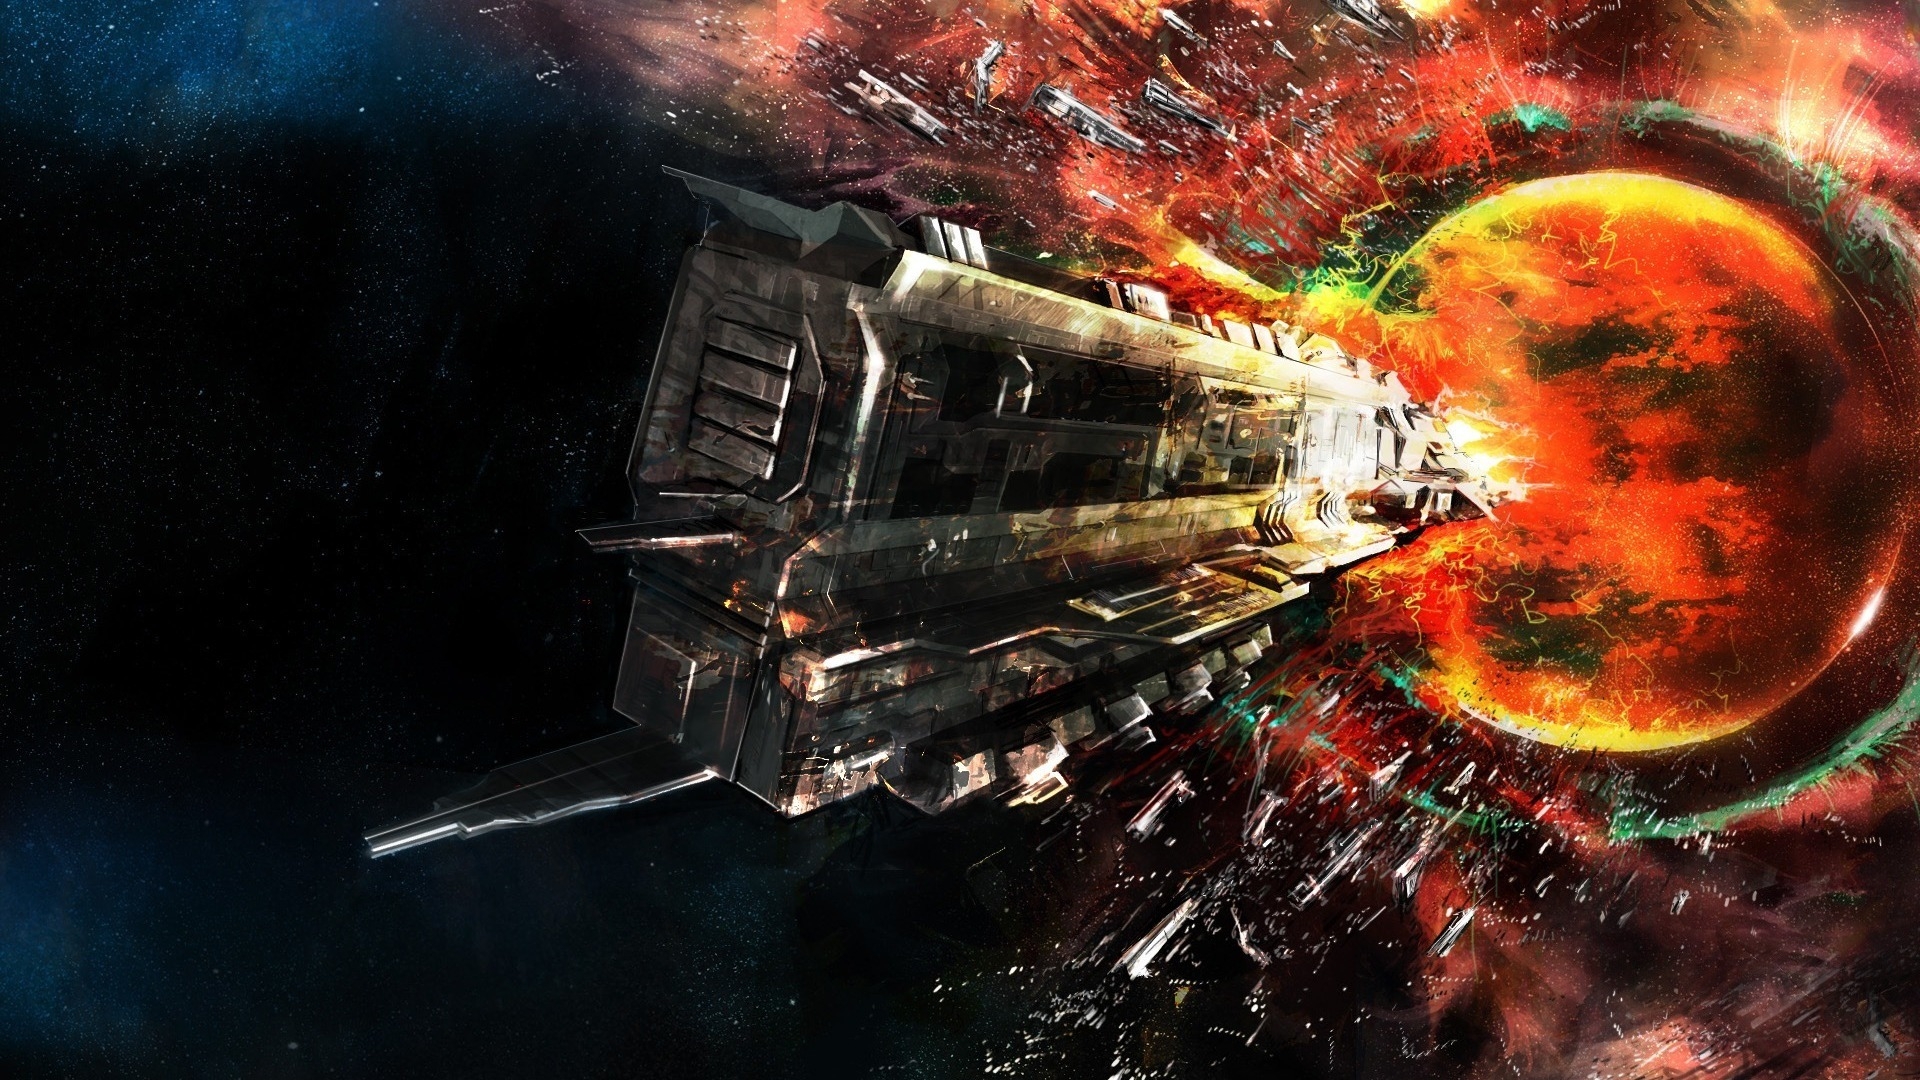 Space Crash for 1920 x 1080 HDTV 1080p resolution